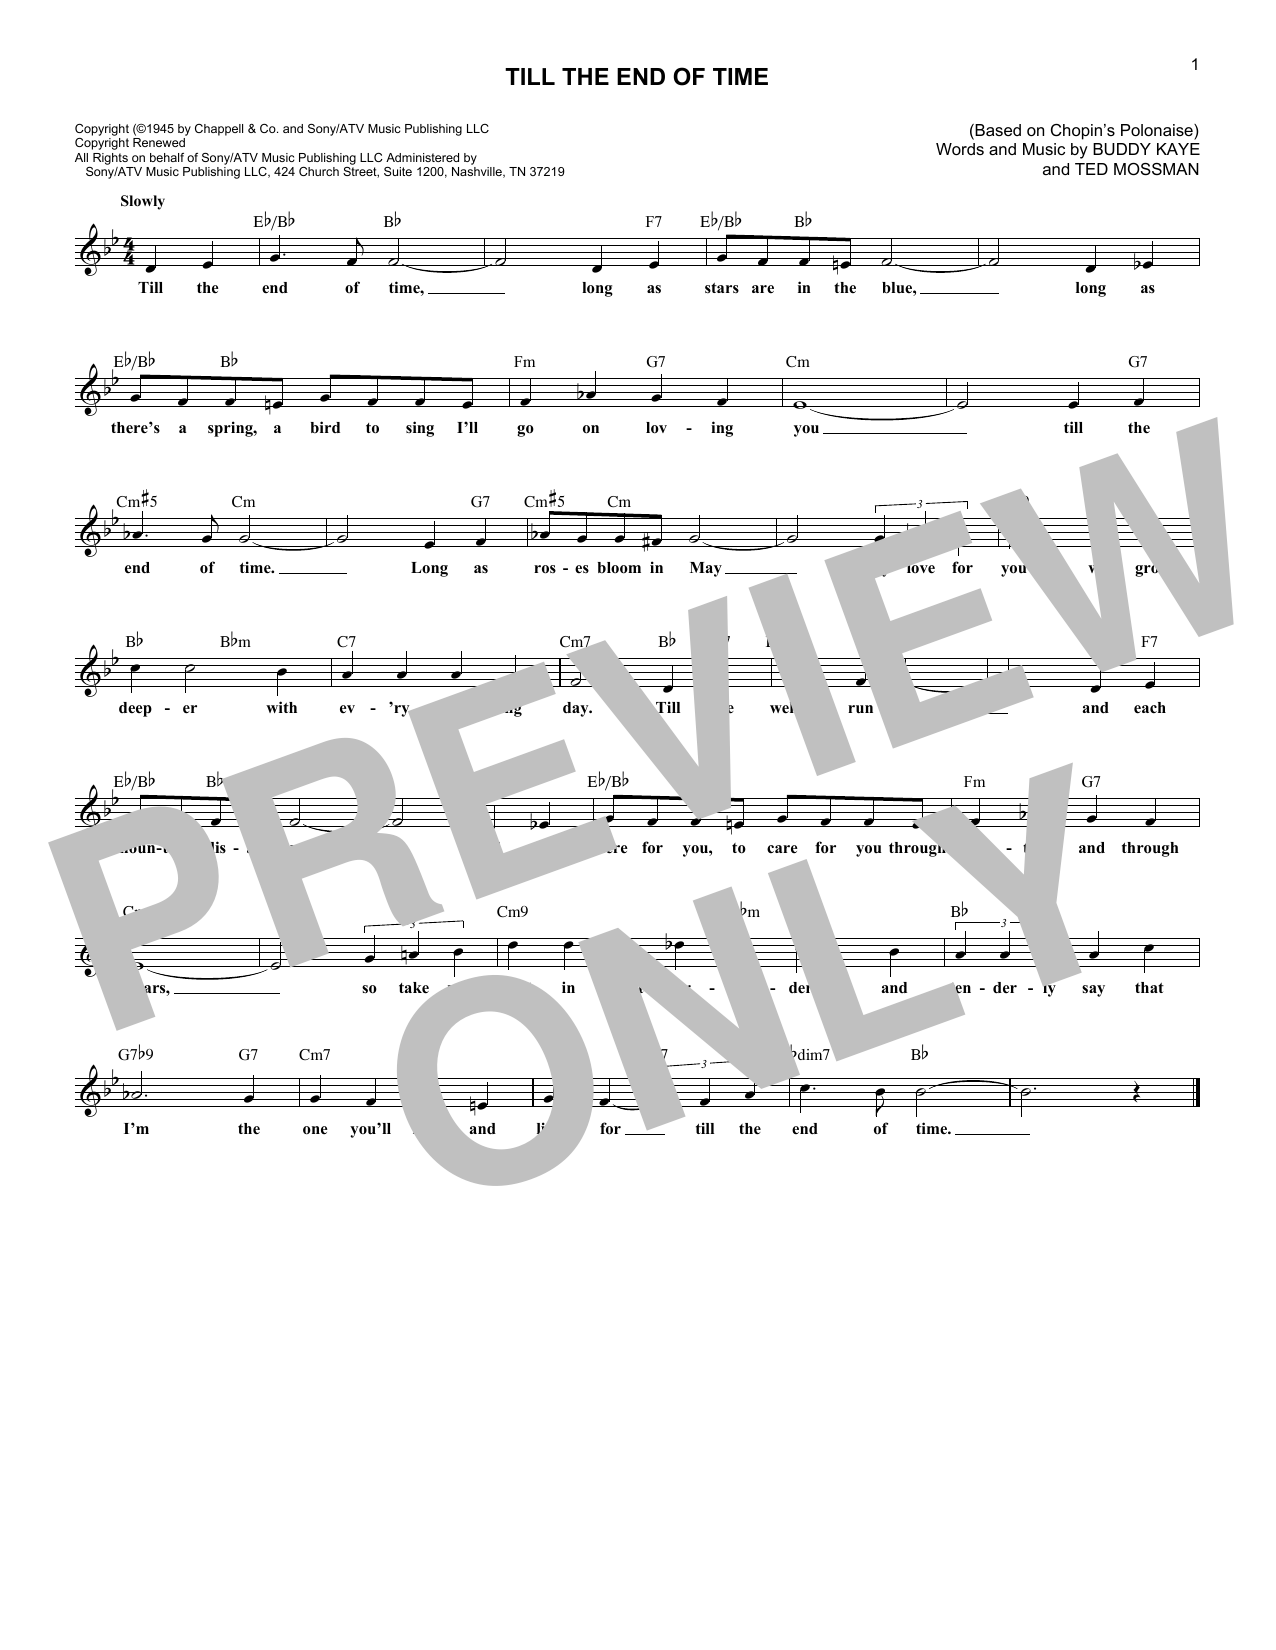 Download Buddy Kaye Till The End Of Time Sheet Music